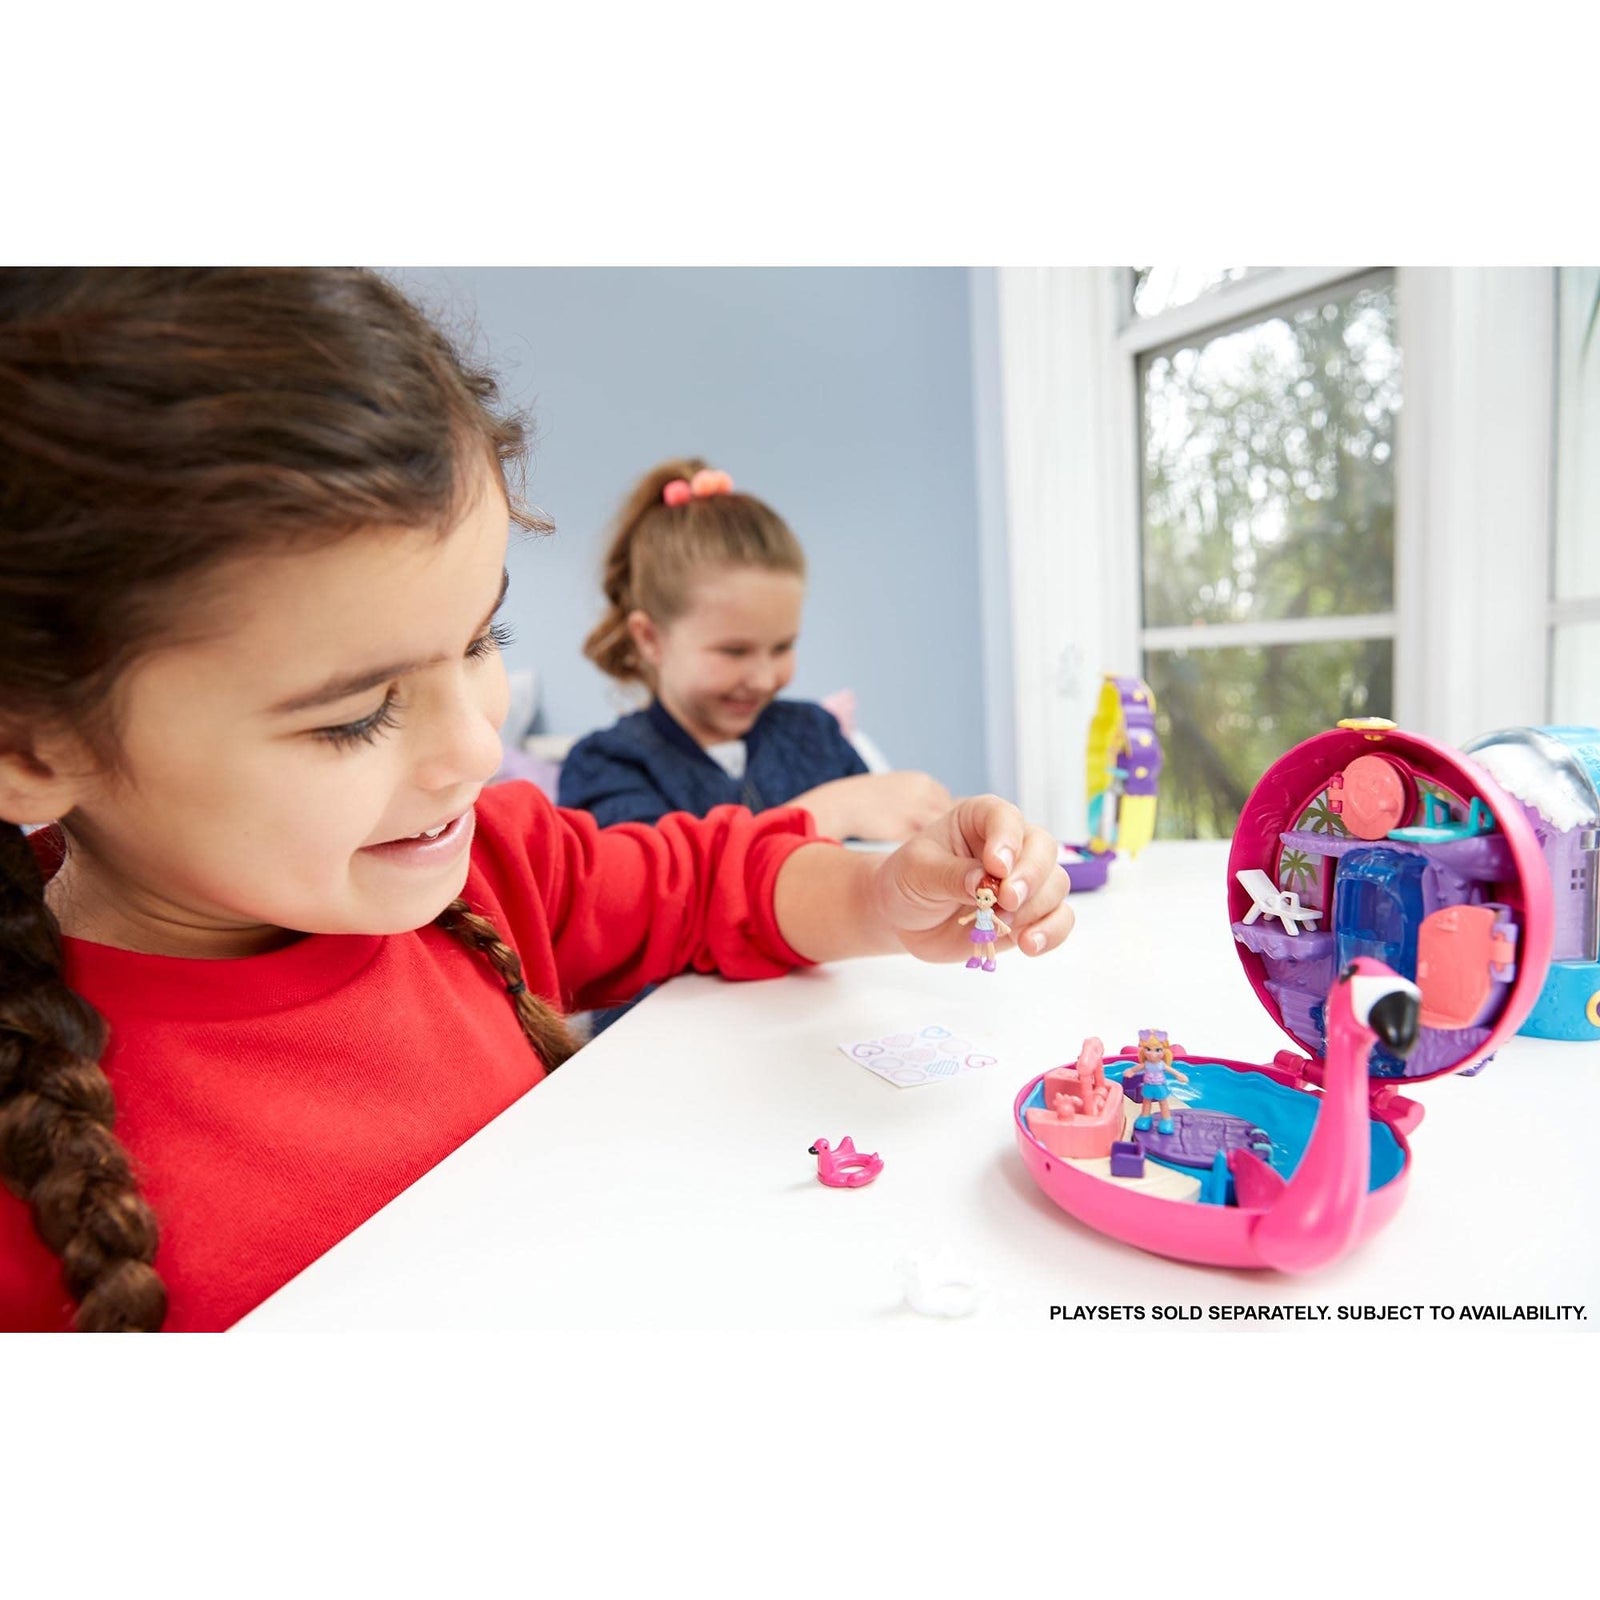 Polly Pocket Pocket World Flamingo Floatie Compact with Surprise Reveals, Micro Dolls & Accessories [Amazon Exclusive]